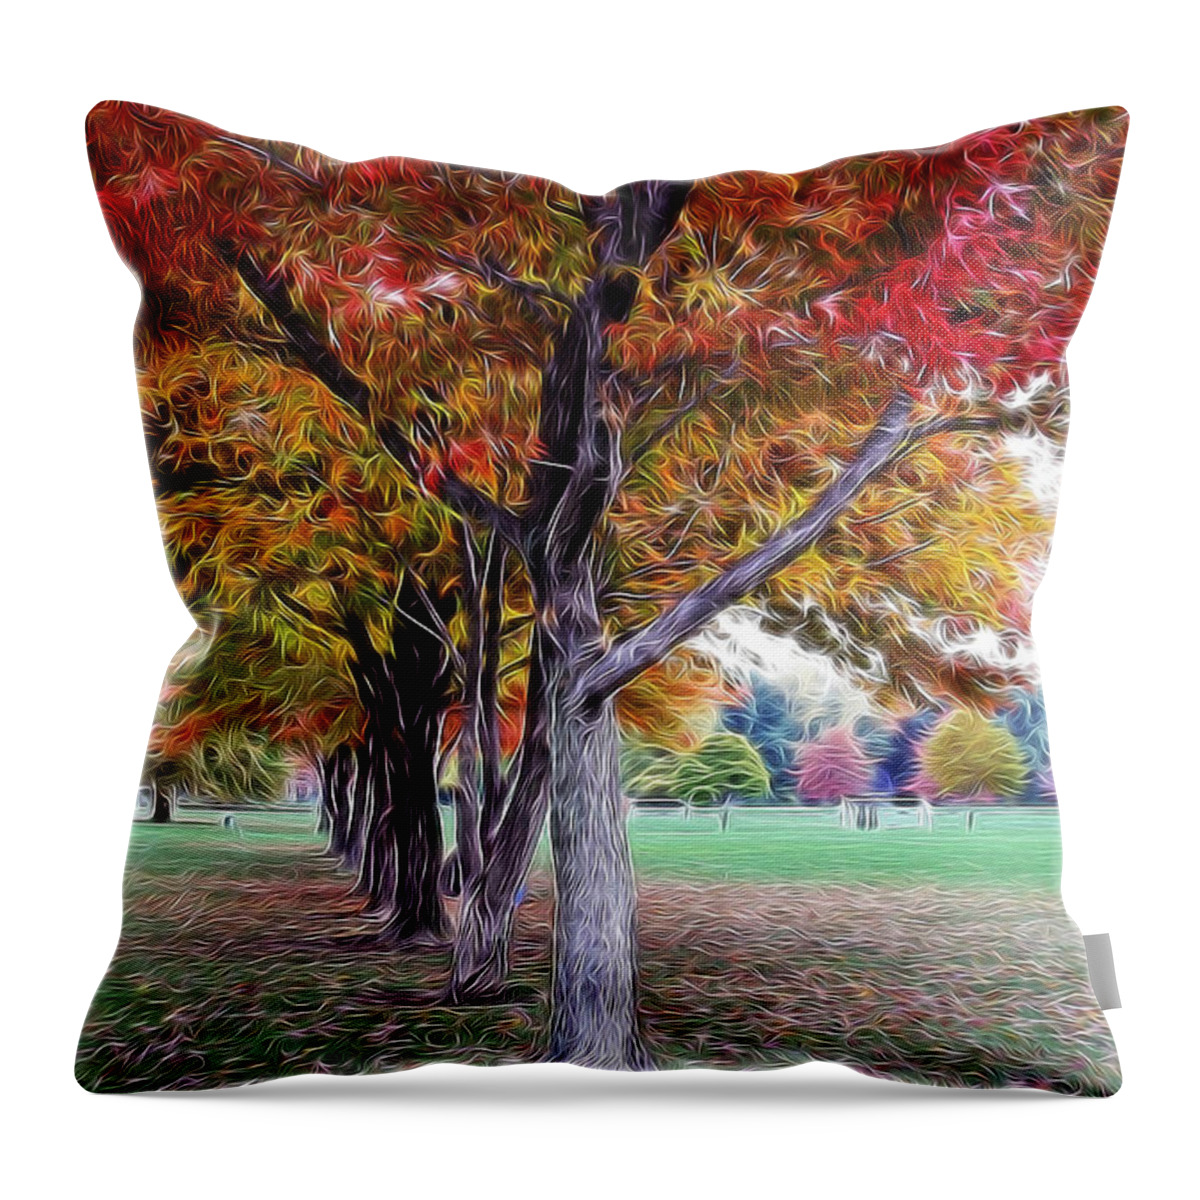 Autumn Throw Pillow featuring the photograph Autumn In Swirls by Jackson Pearson